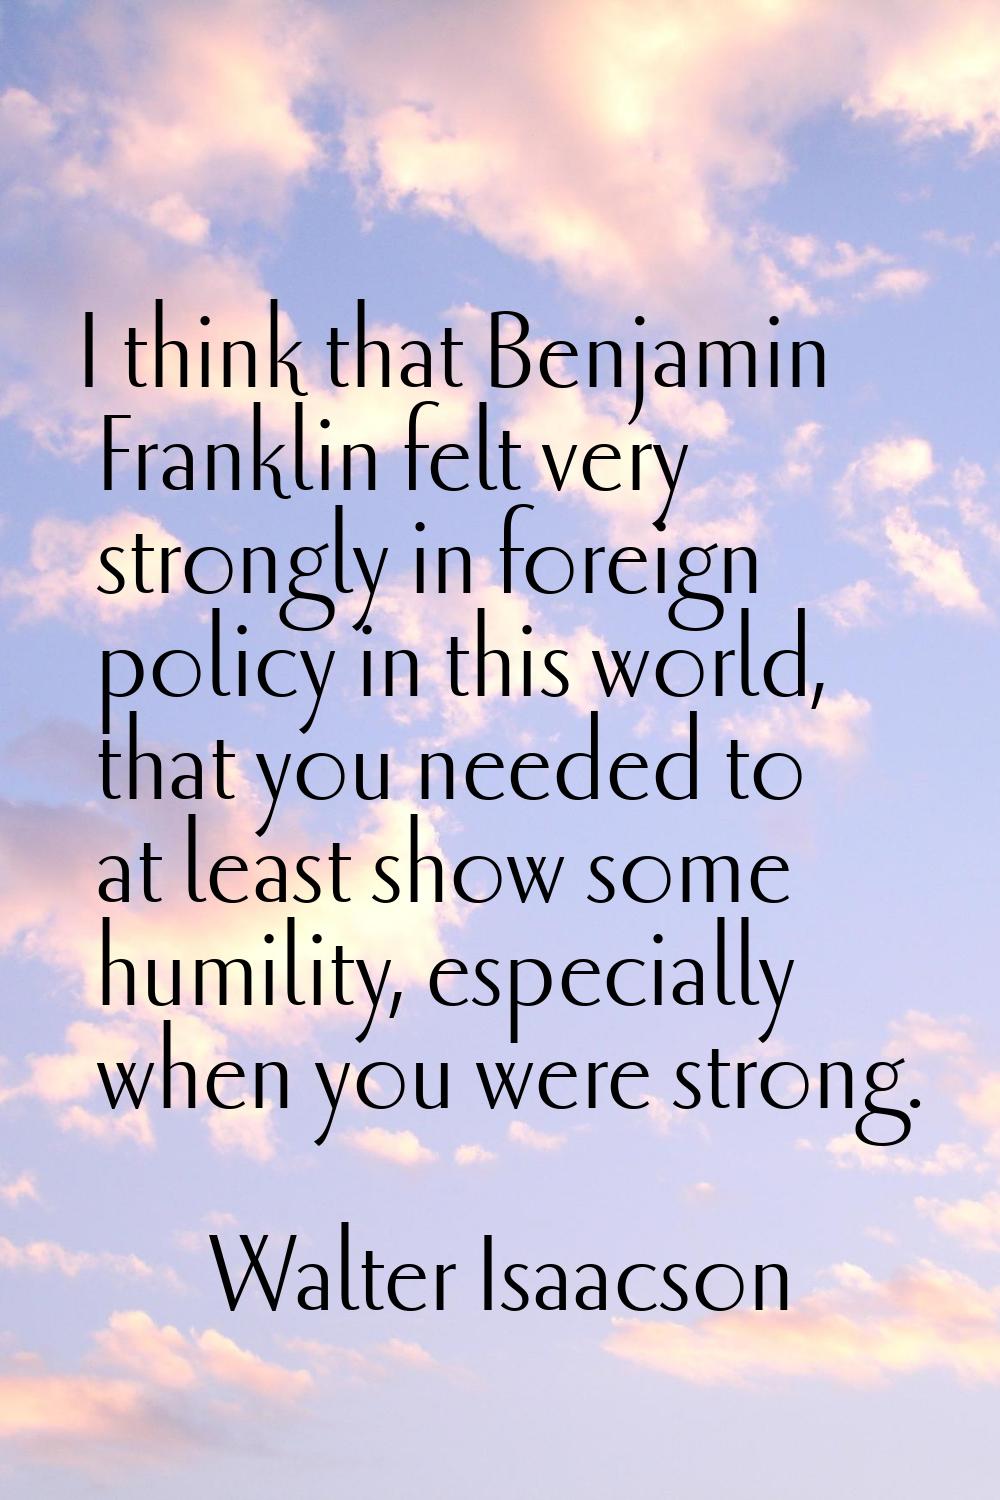 I think that Benjamin Franklin felt very strongly in foreign policy in this world, that you needed 